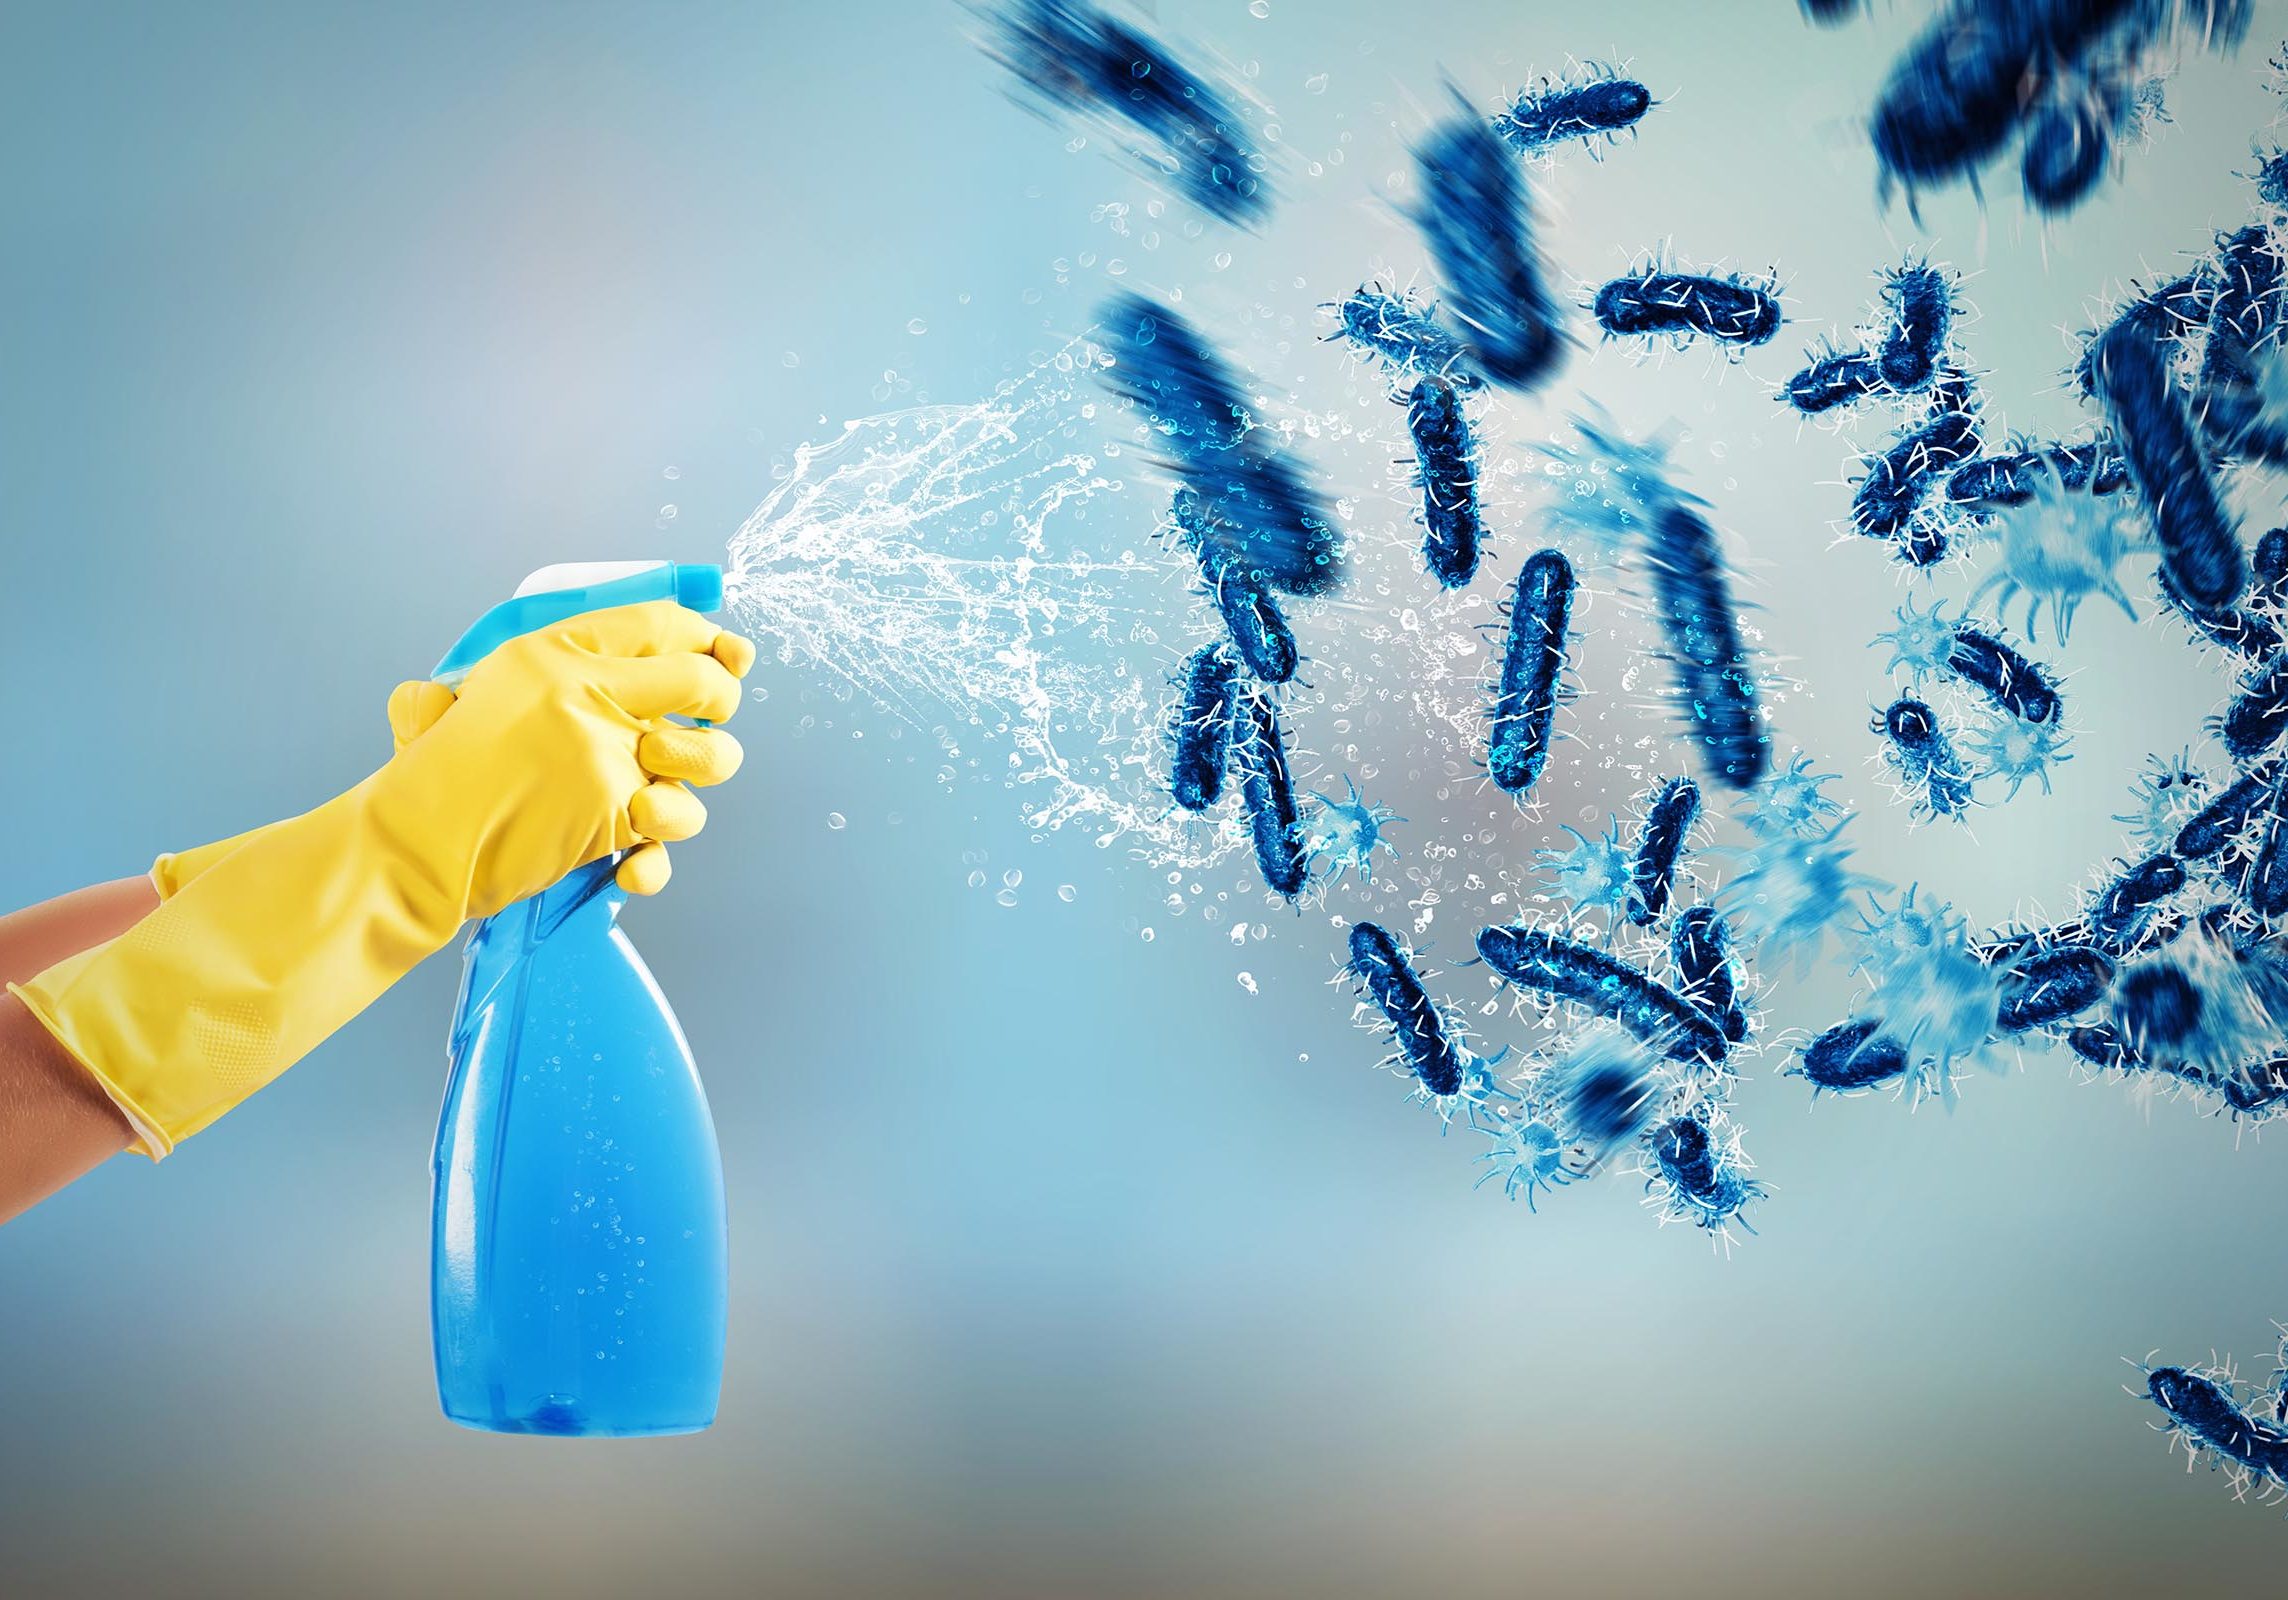 Housewife cleans determined with much cleaner spray to defeat the germs. 3D Rendering